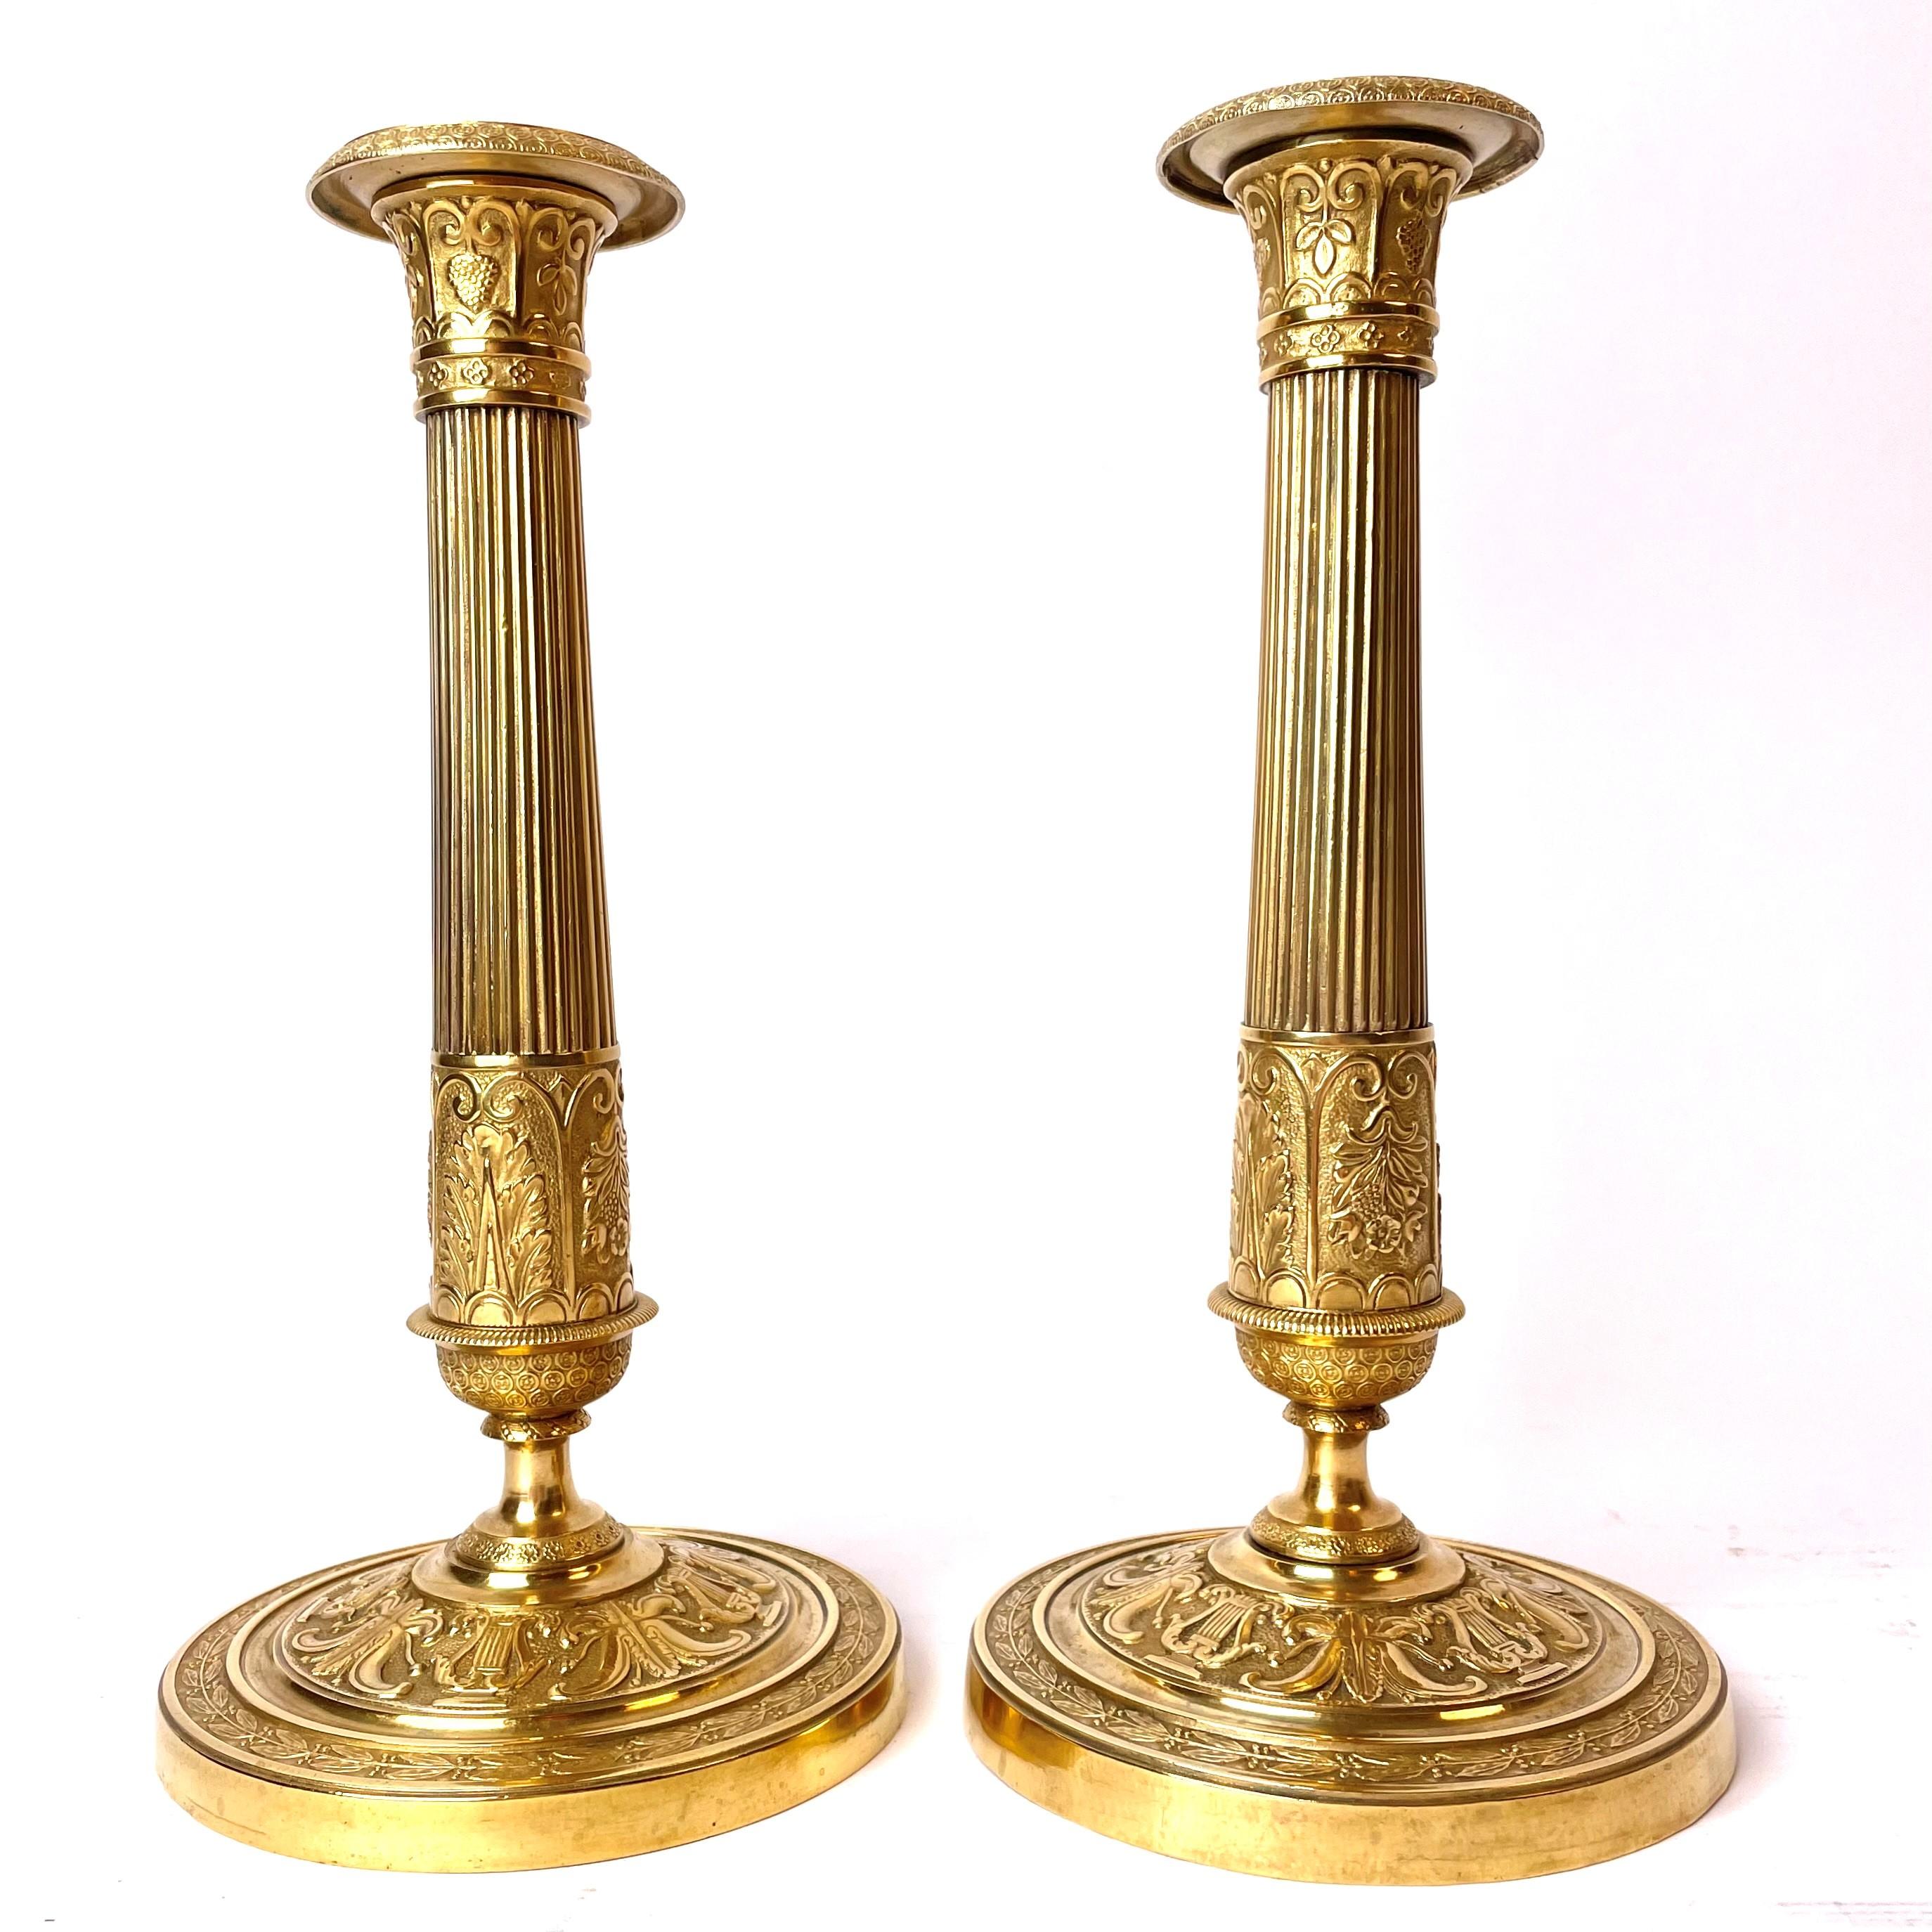 A pair beautiful gilt bronze candlesticks signed by Pierre-Jules Mene (1810-1879) (see pictures). Probably made in 1830s. Decorated with harps, flowers, leaves and grapes.


Wear consistent with age and use.